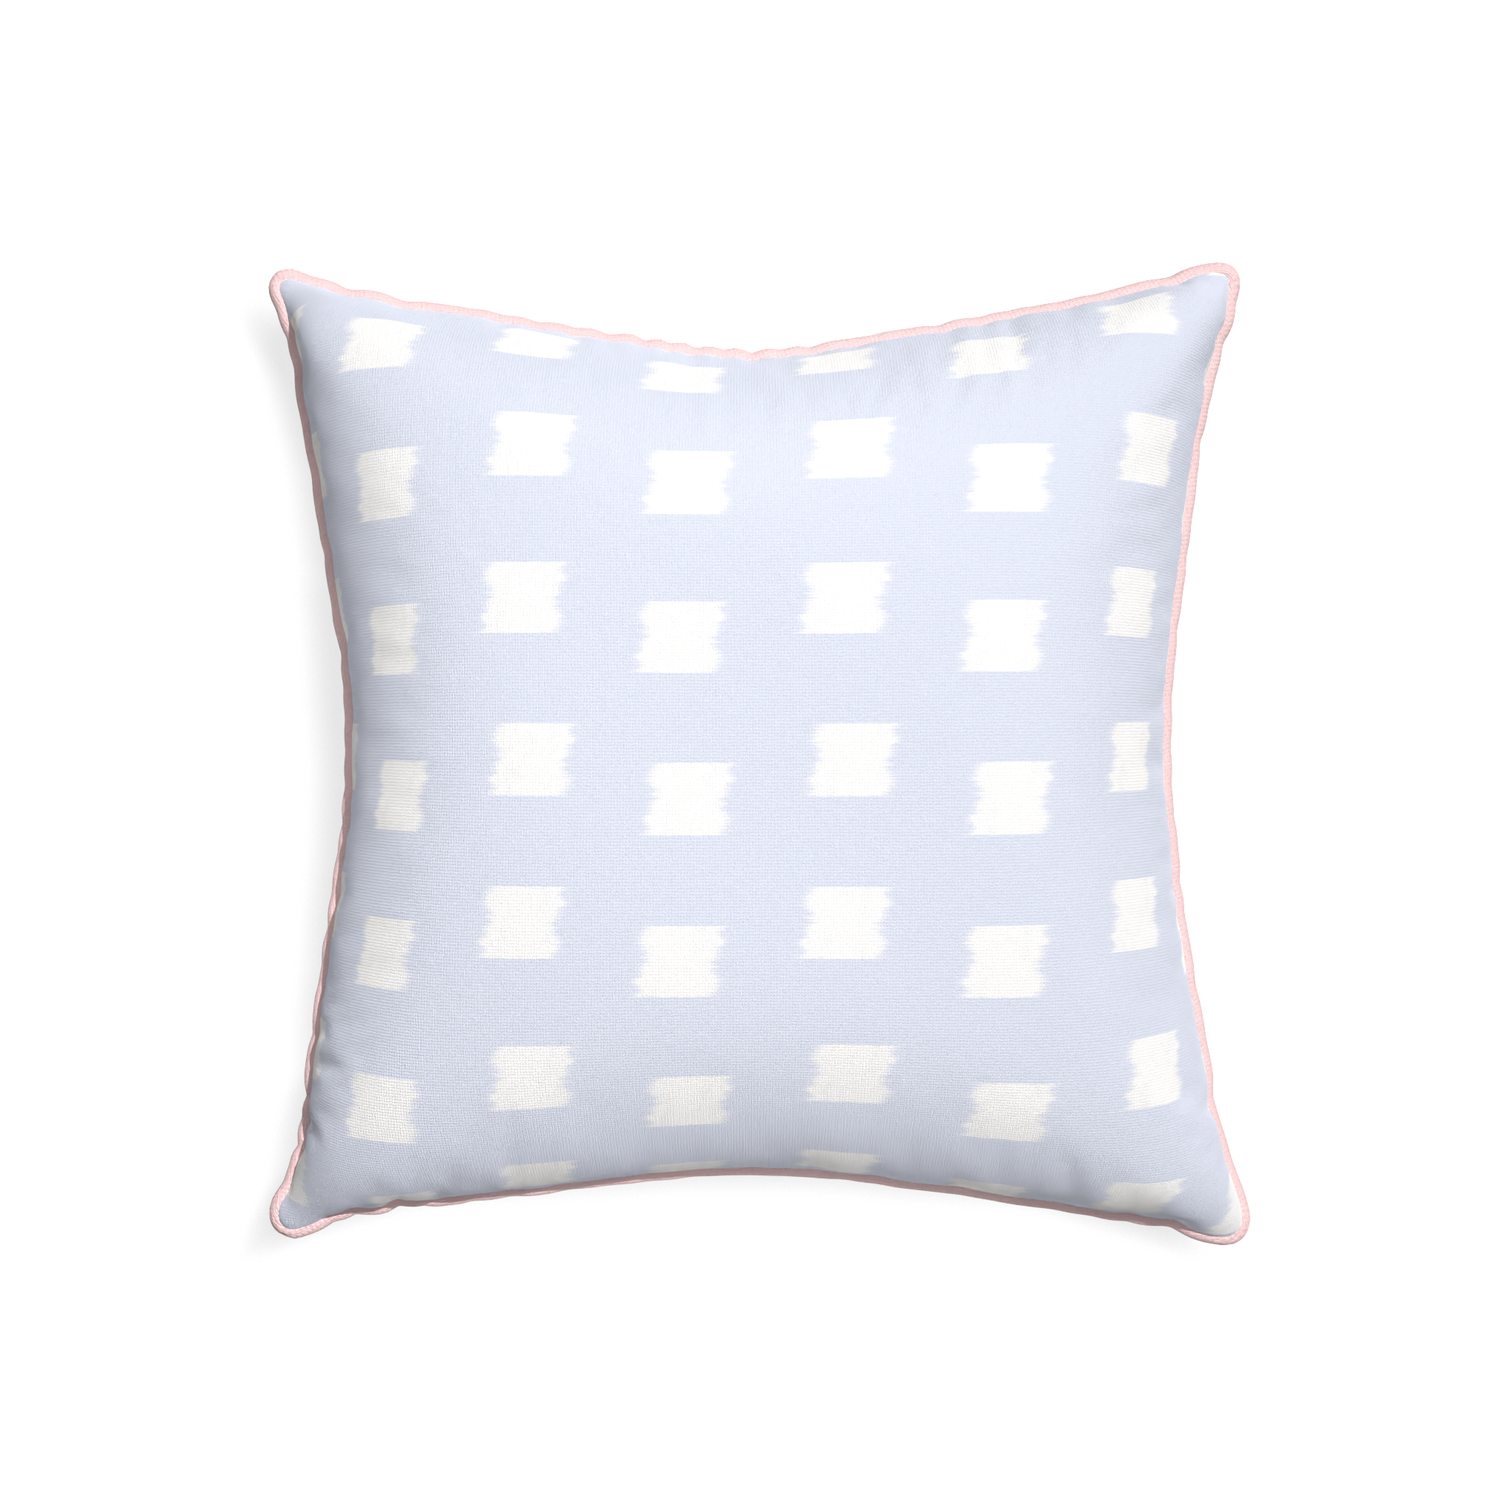 22-square denton custom sky blue patternpillow with petal piping on white background